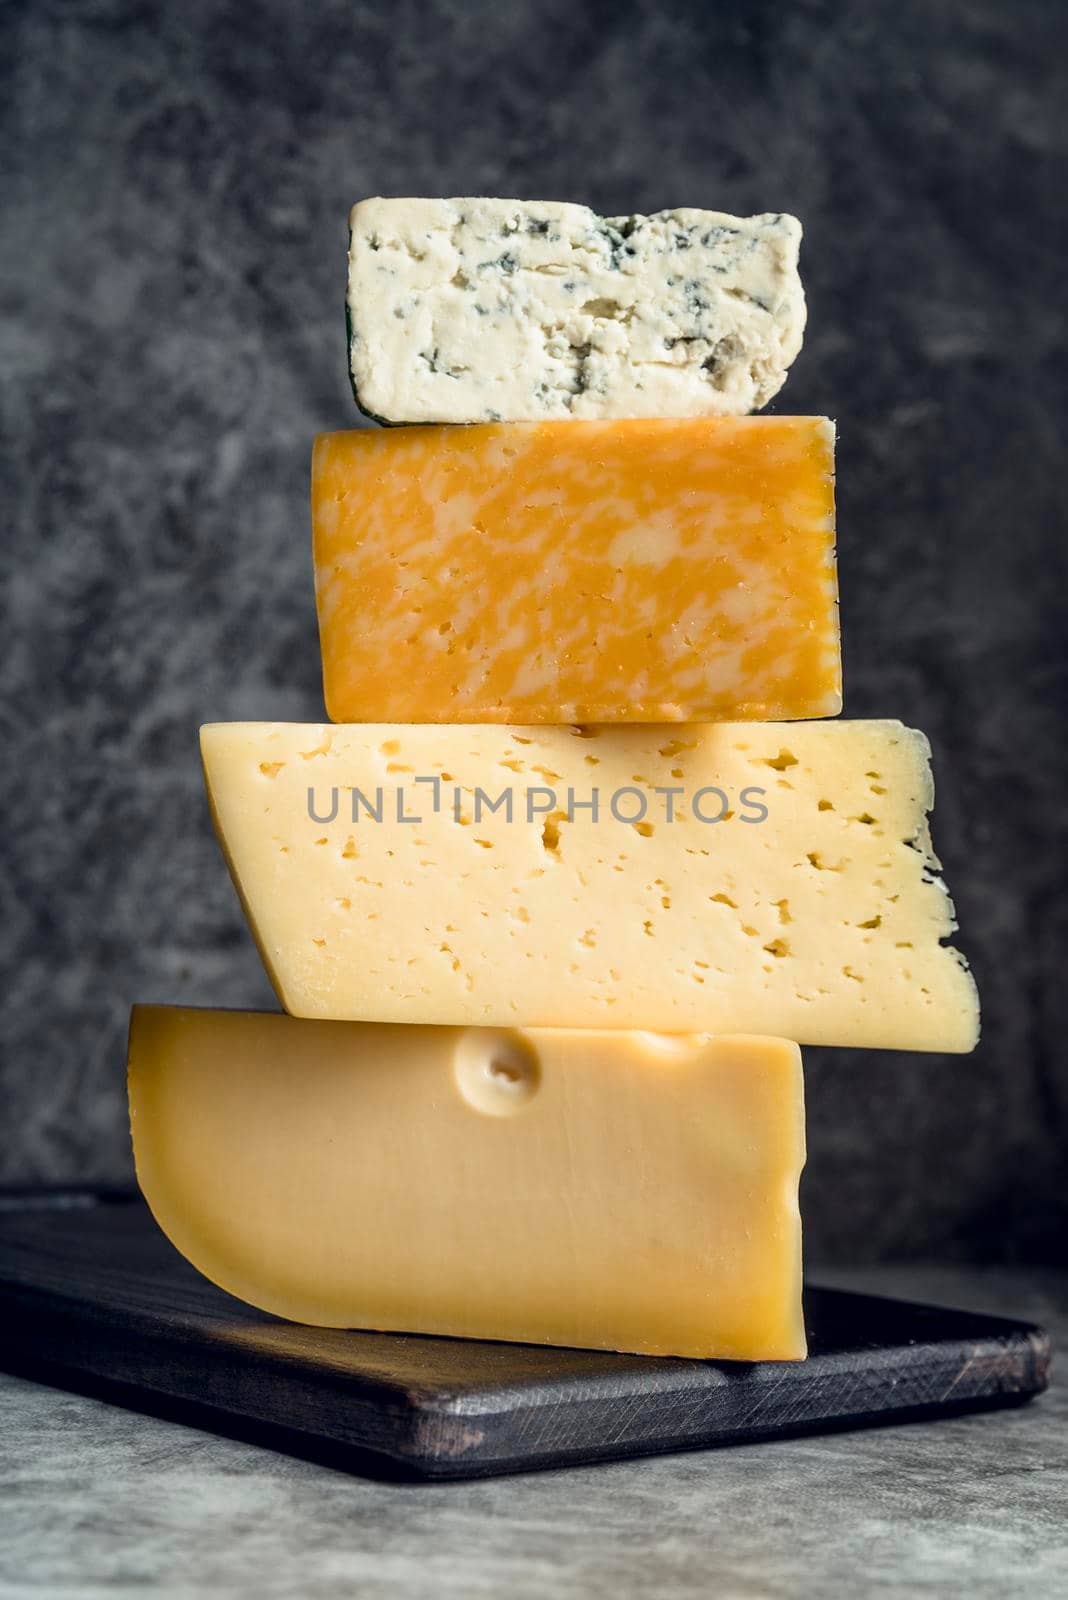 delicious pile cheese top each other. High quality photo by Zahard